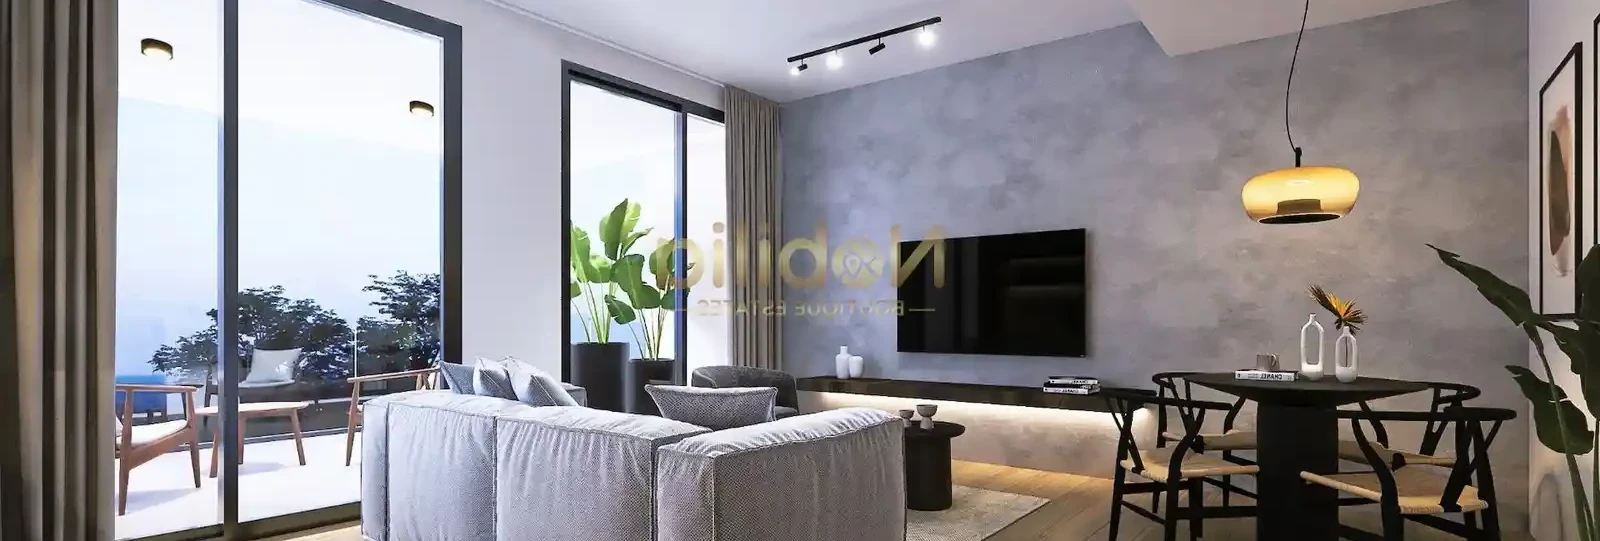 1-bedroom apartment fоr sаle €176.000, image 1